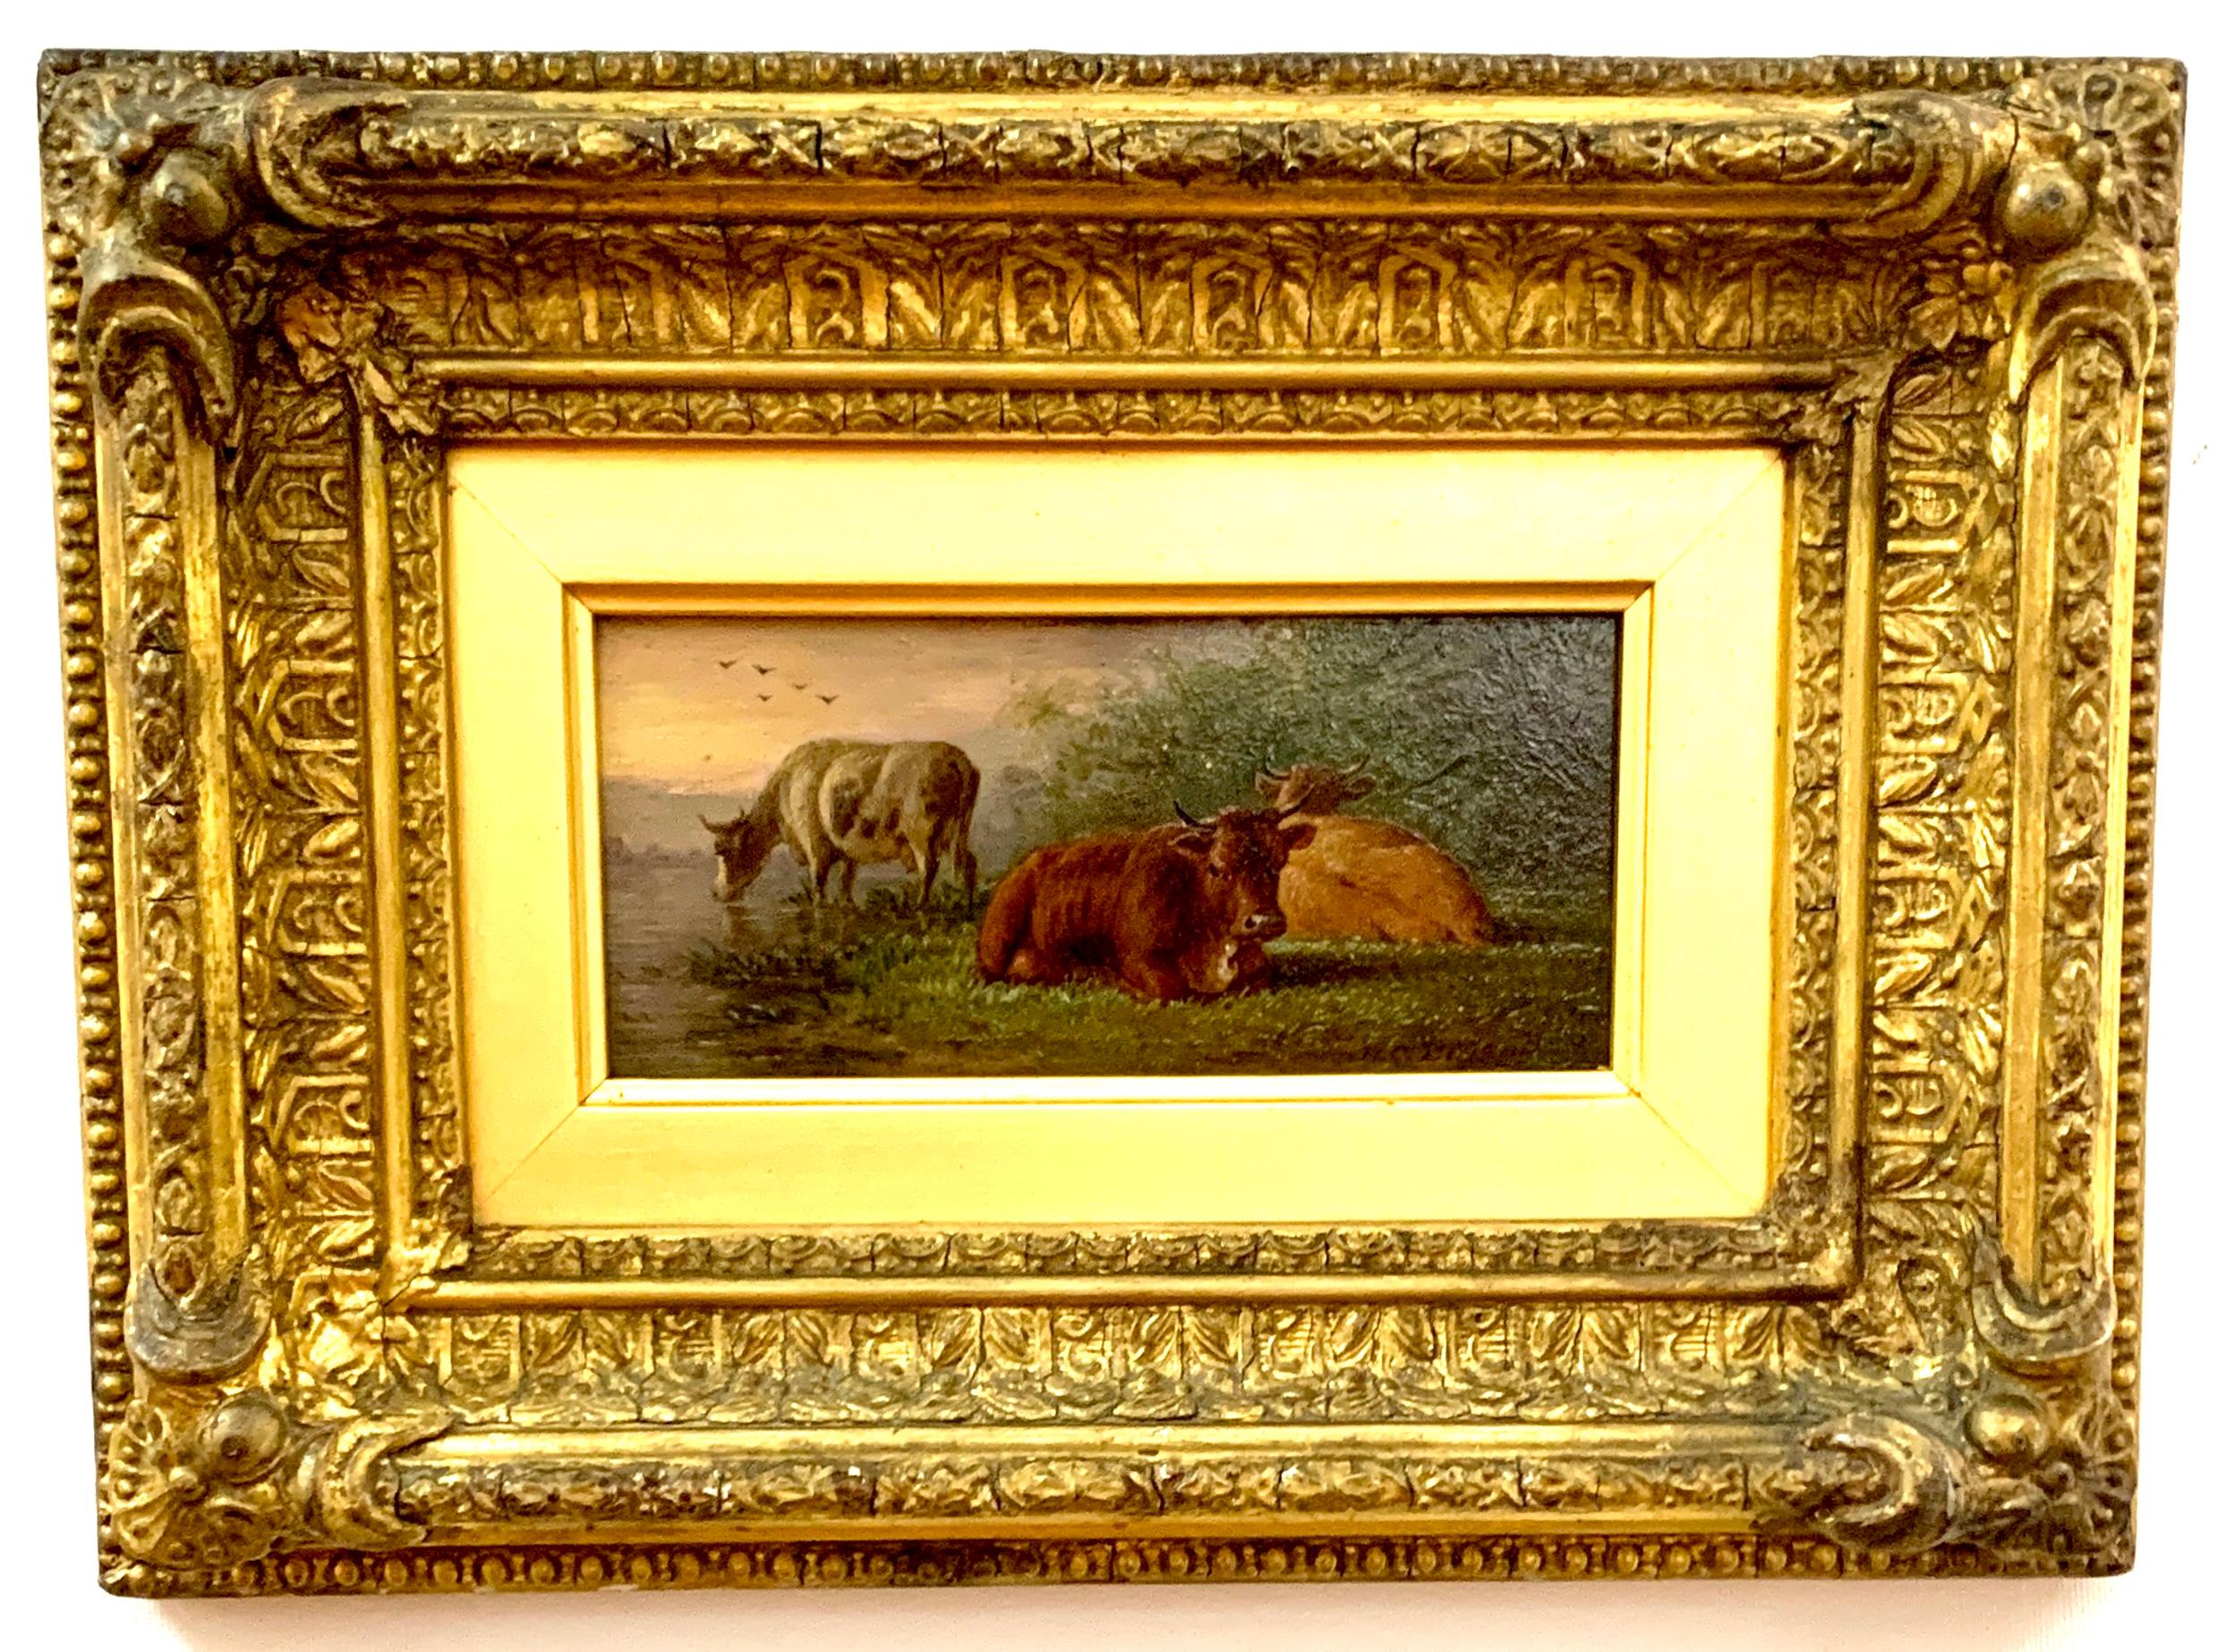 Henry Charles Bryant Animal Painting - 19th century Antique English Farm scene with cows resting in a landscape